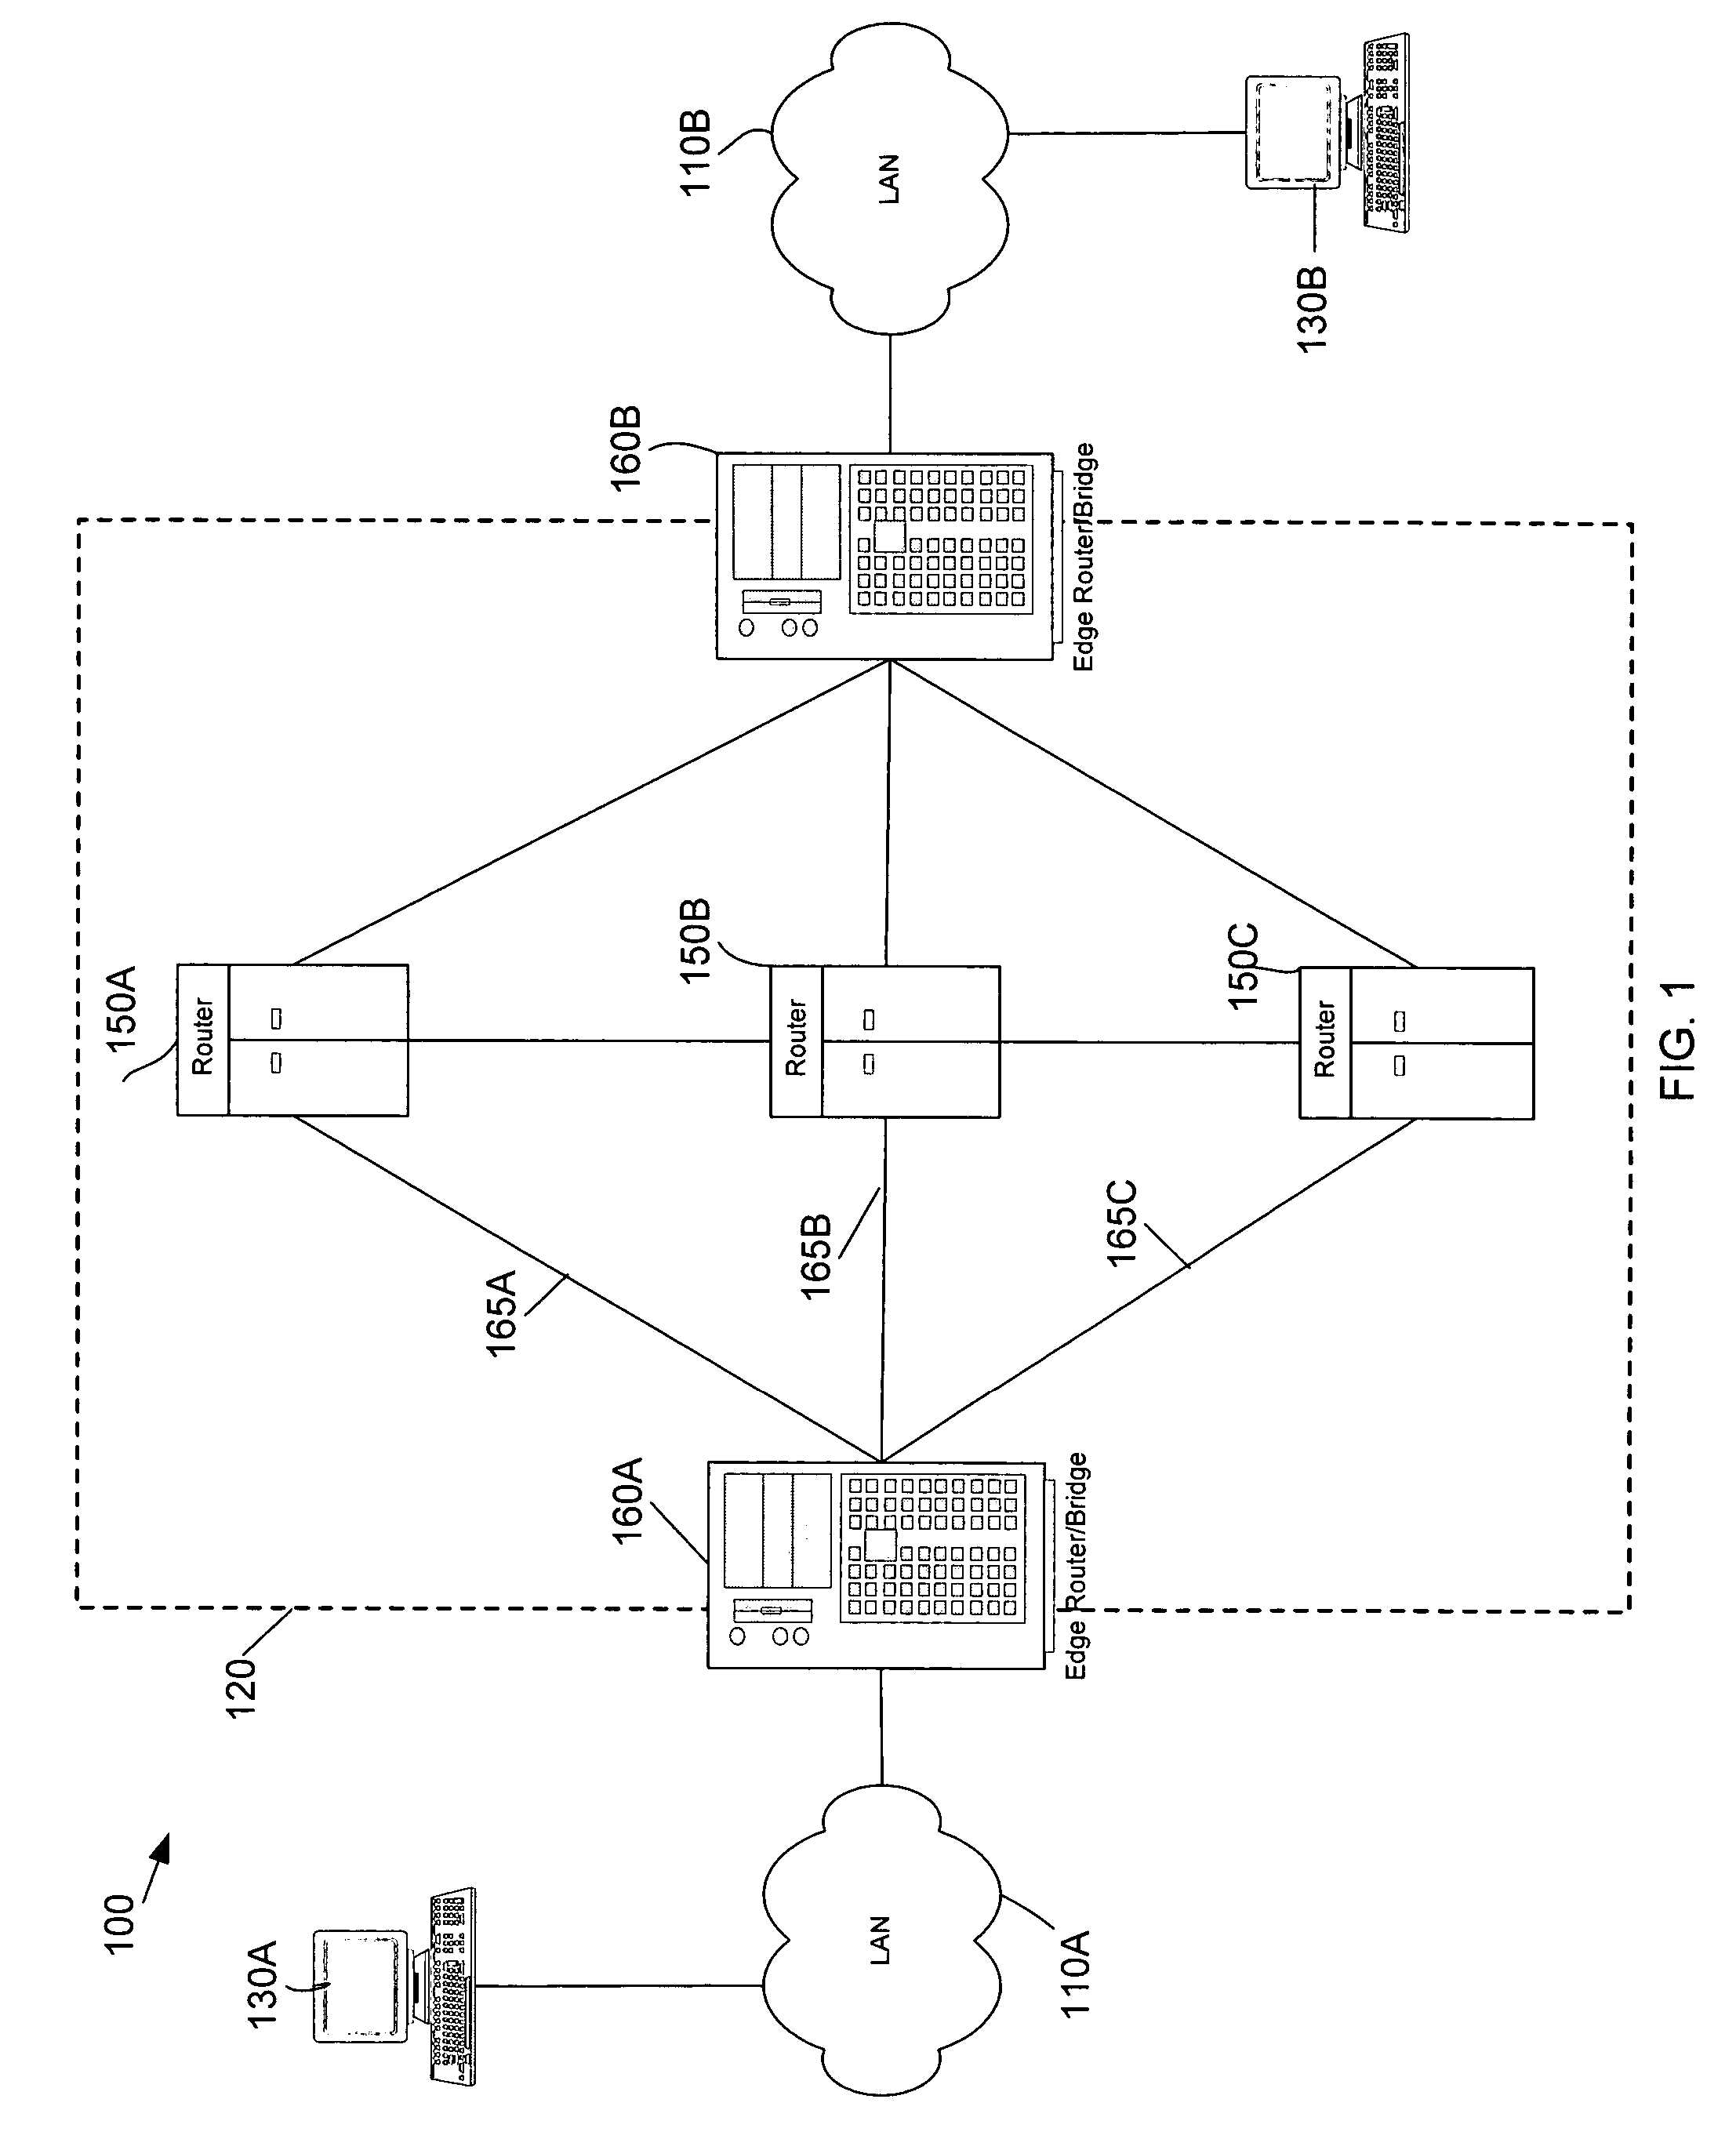 Method and apparatus for longest prefix matching in processing a forwarding information database